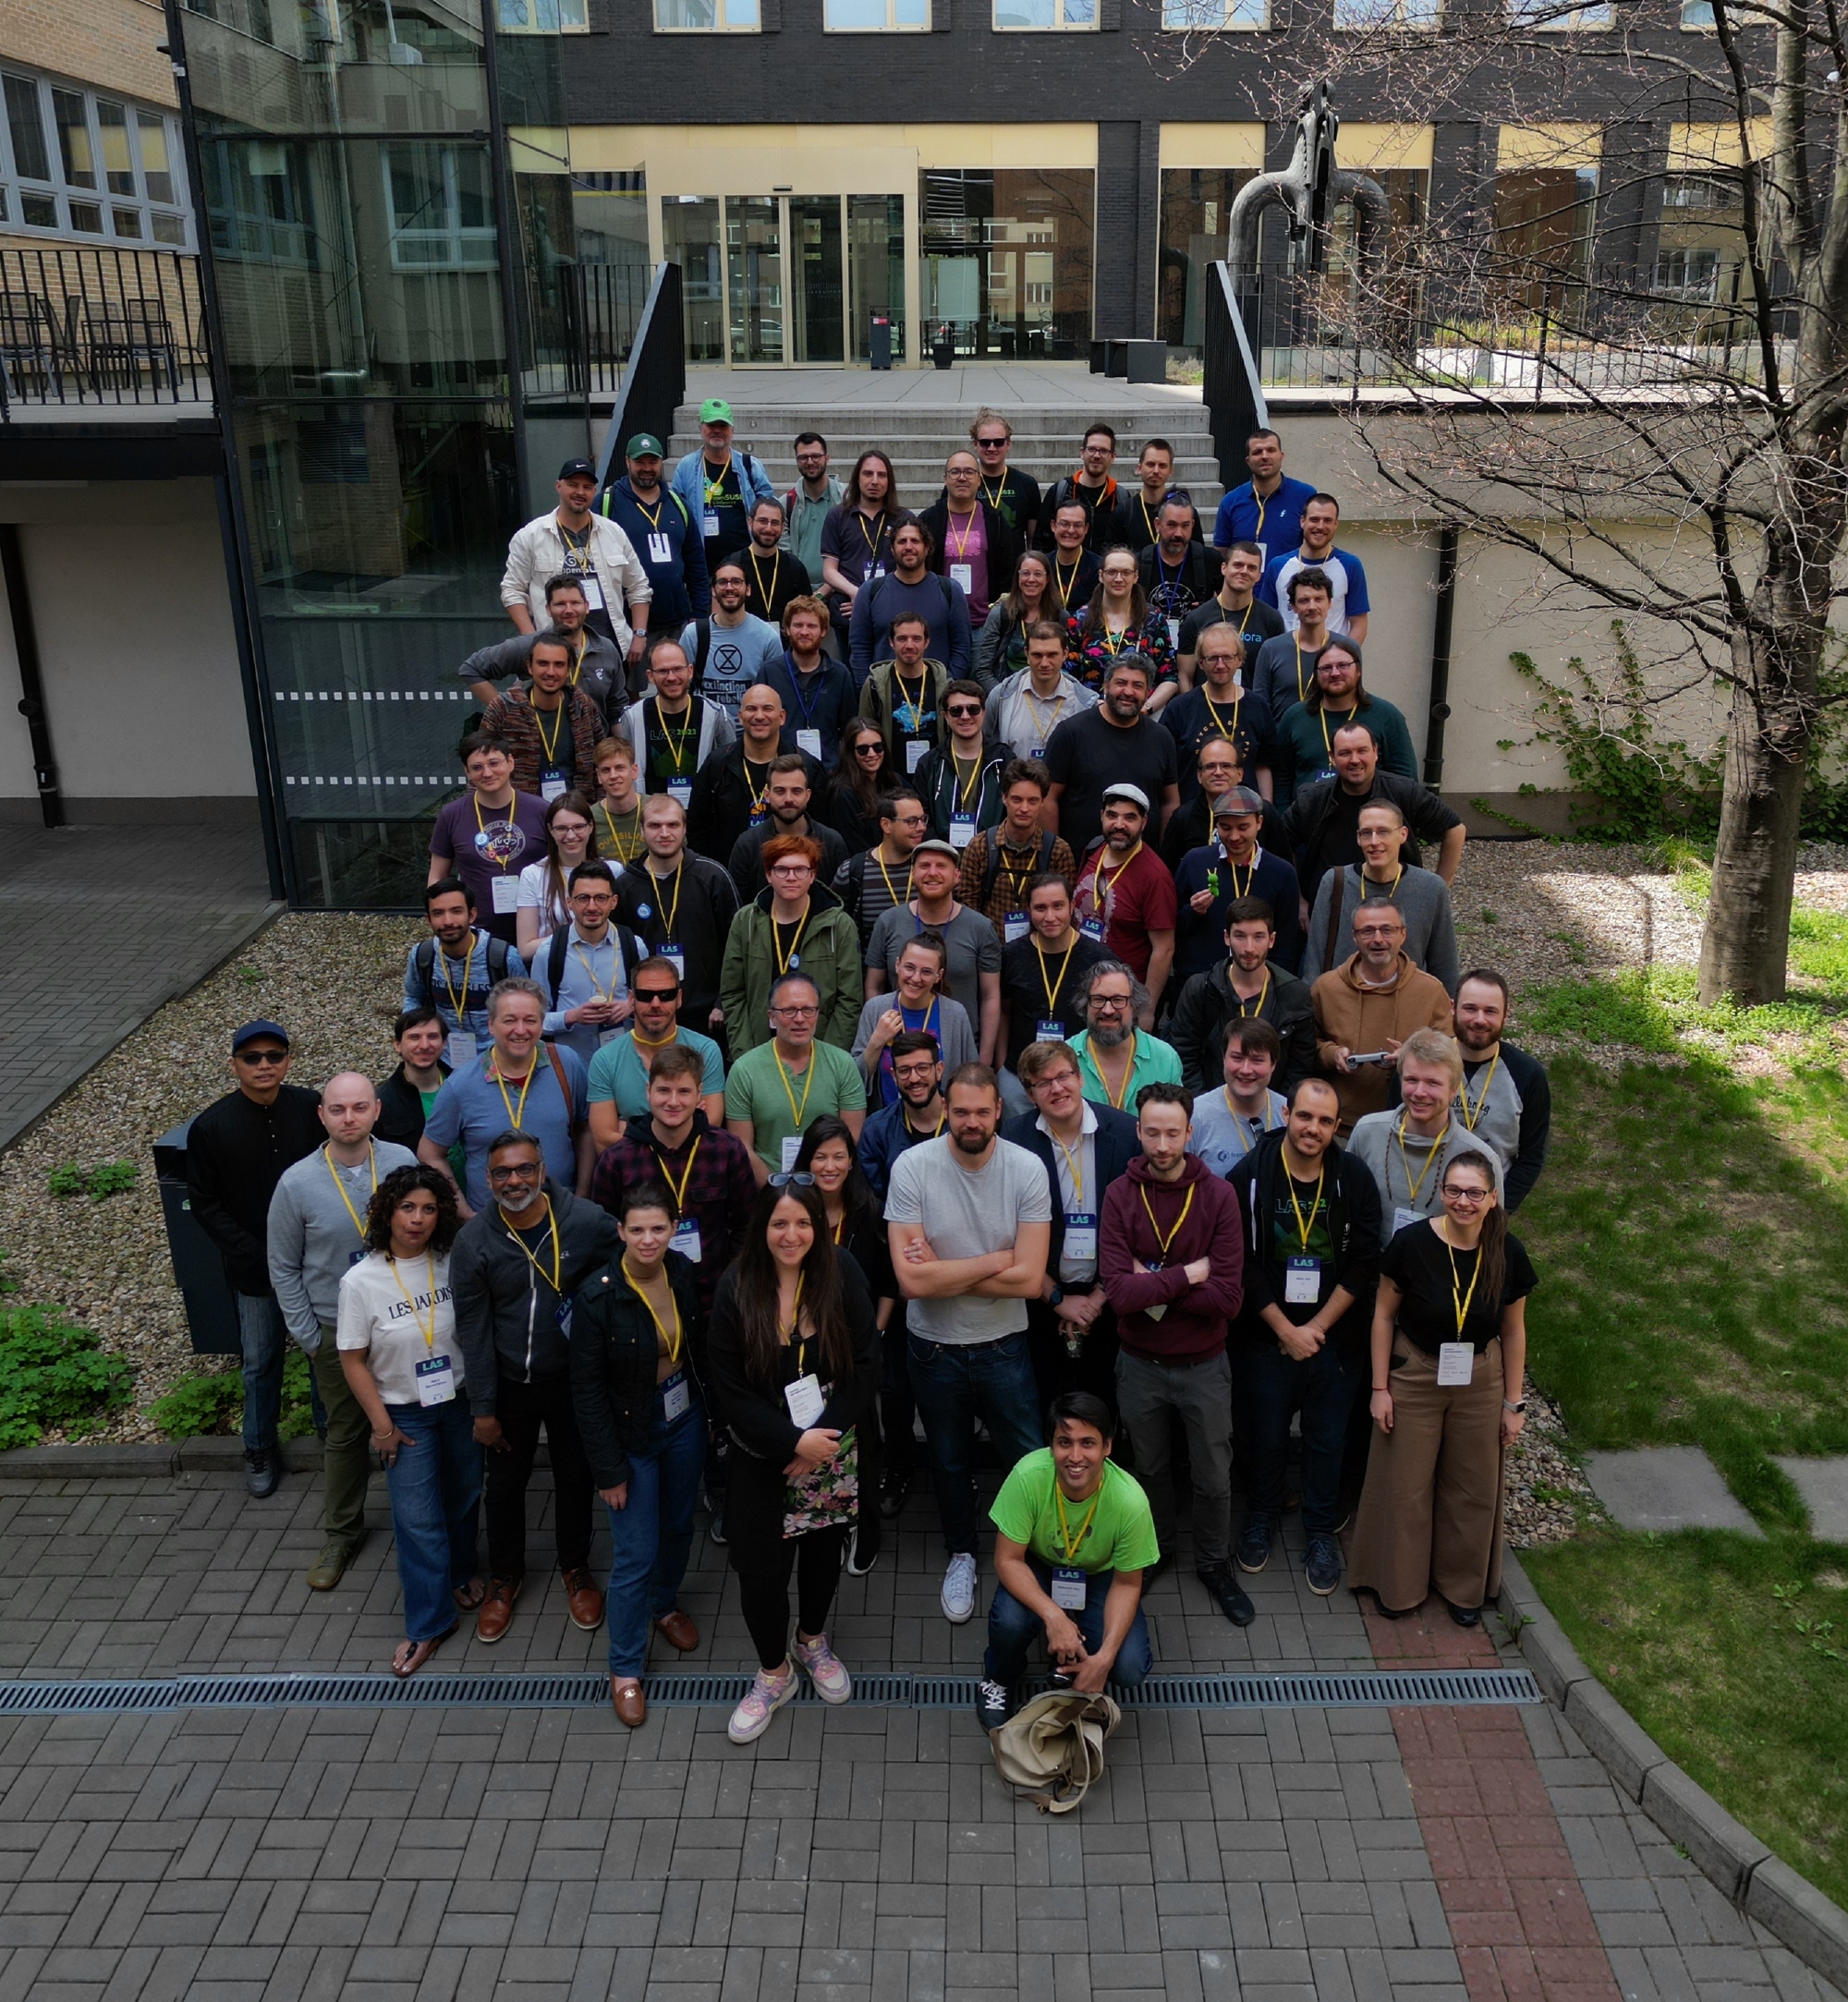 Aerial photograph of the LAS attendees from a drone